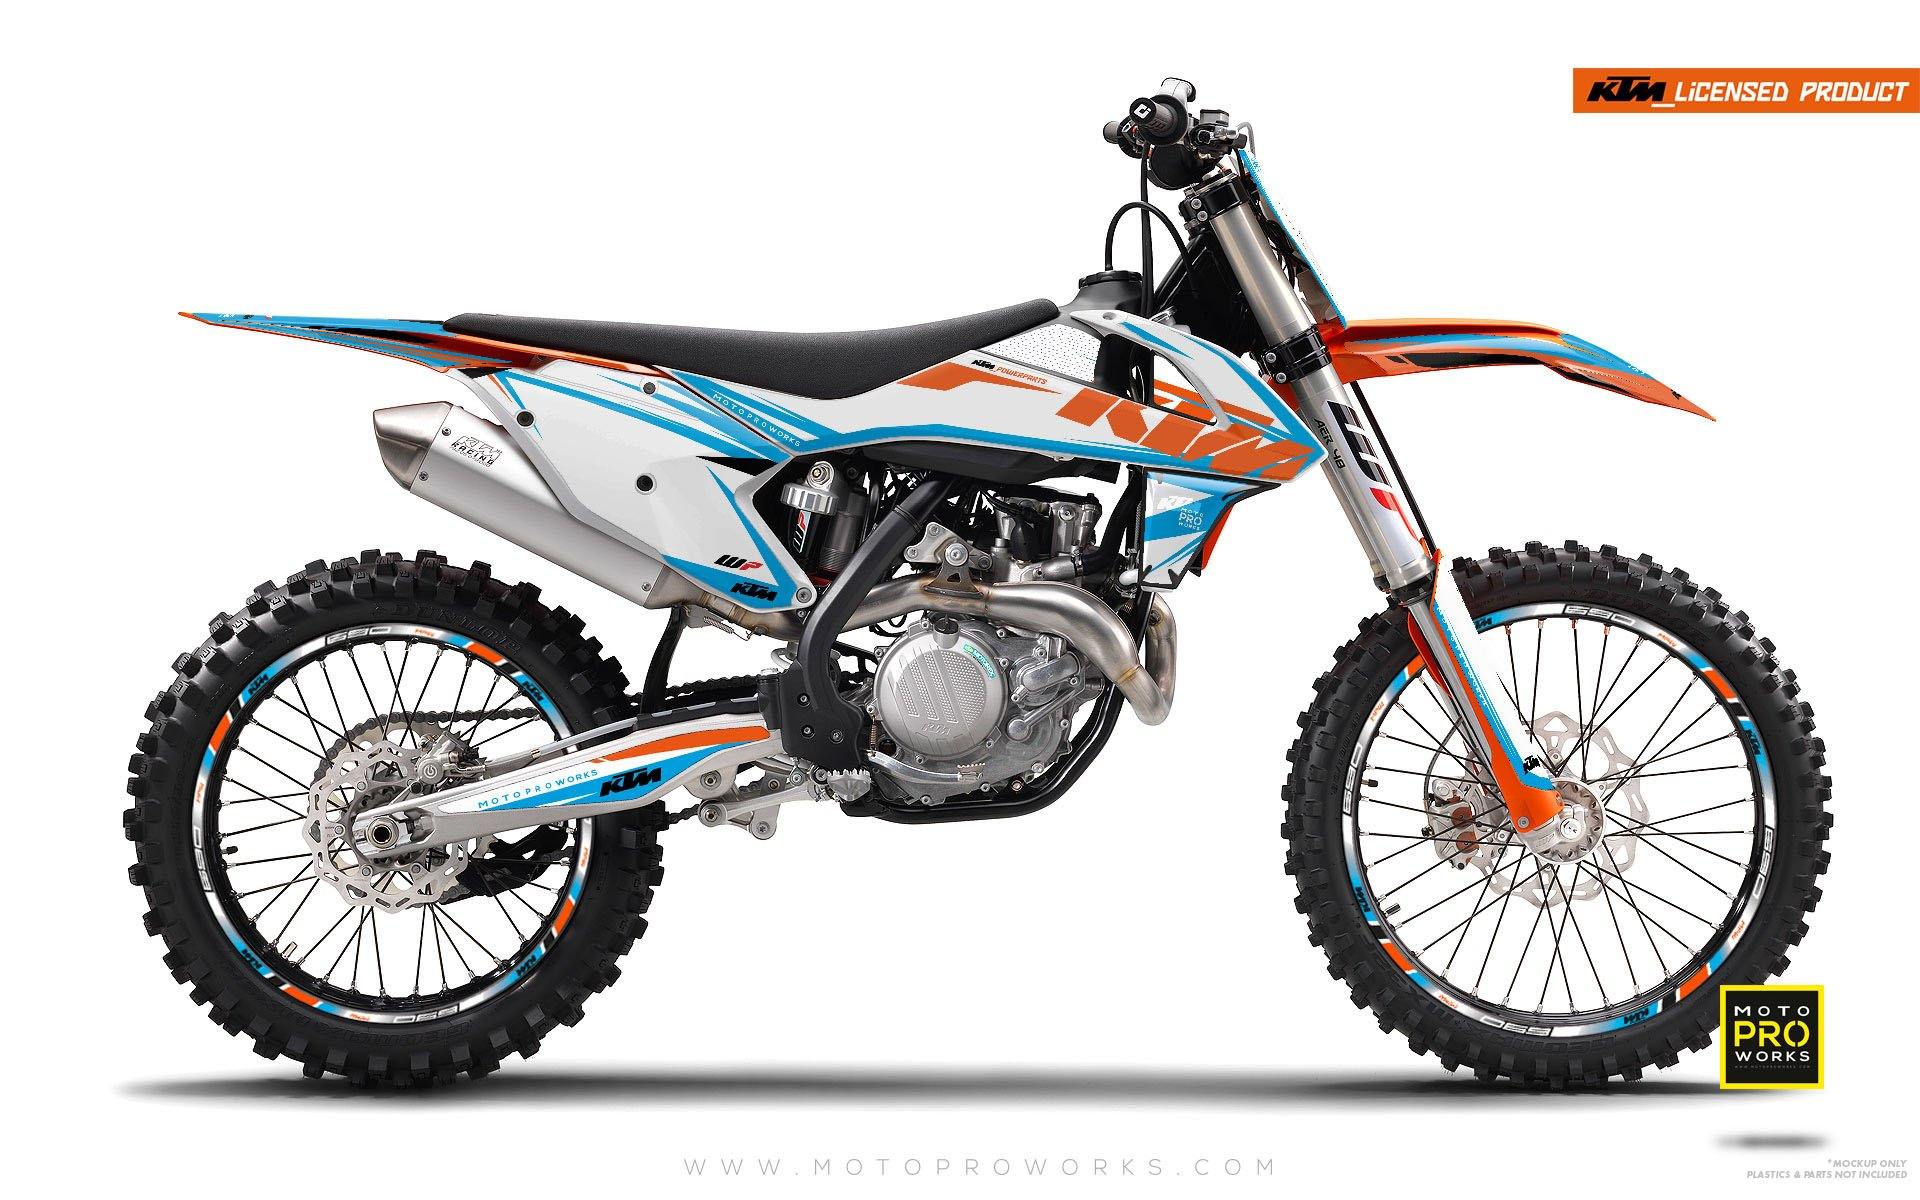 KTM GRAPHIC KIT - "EDGE" (blue/white) - MotoProWorks | Decals and Bike Graphic kit